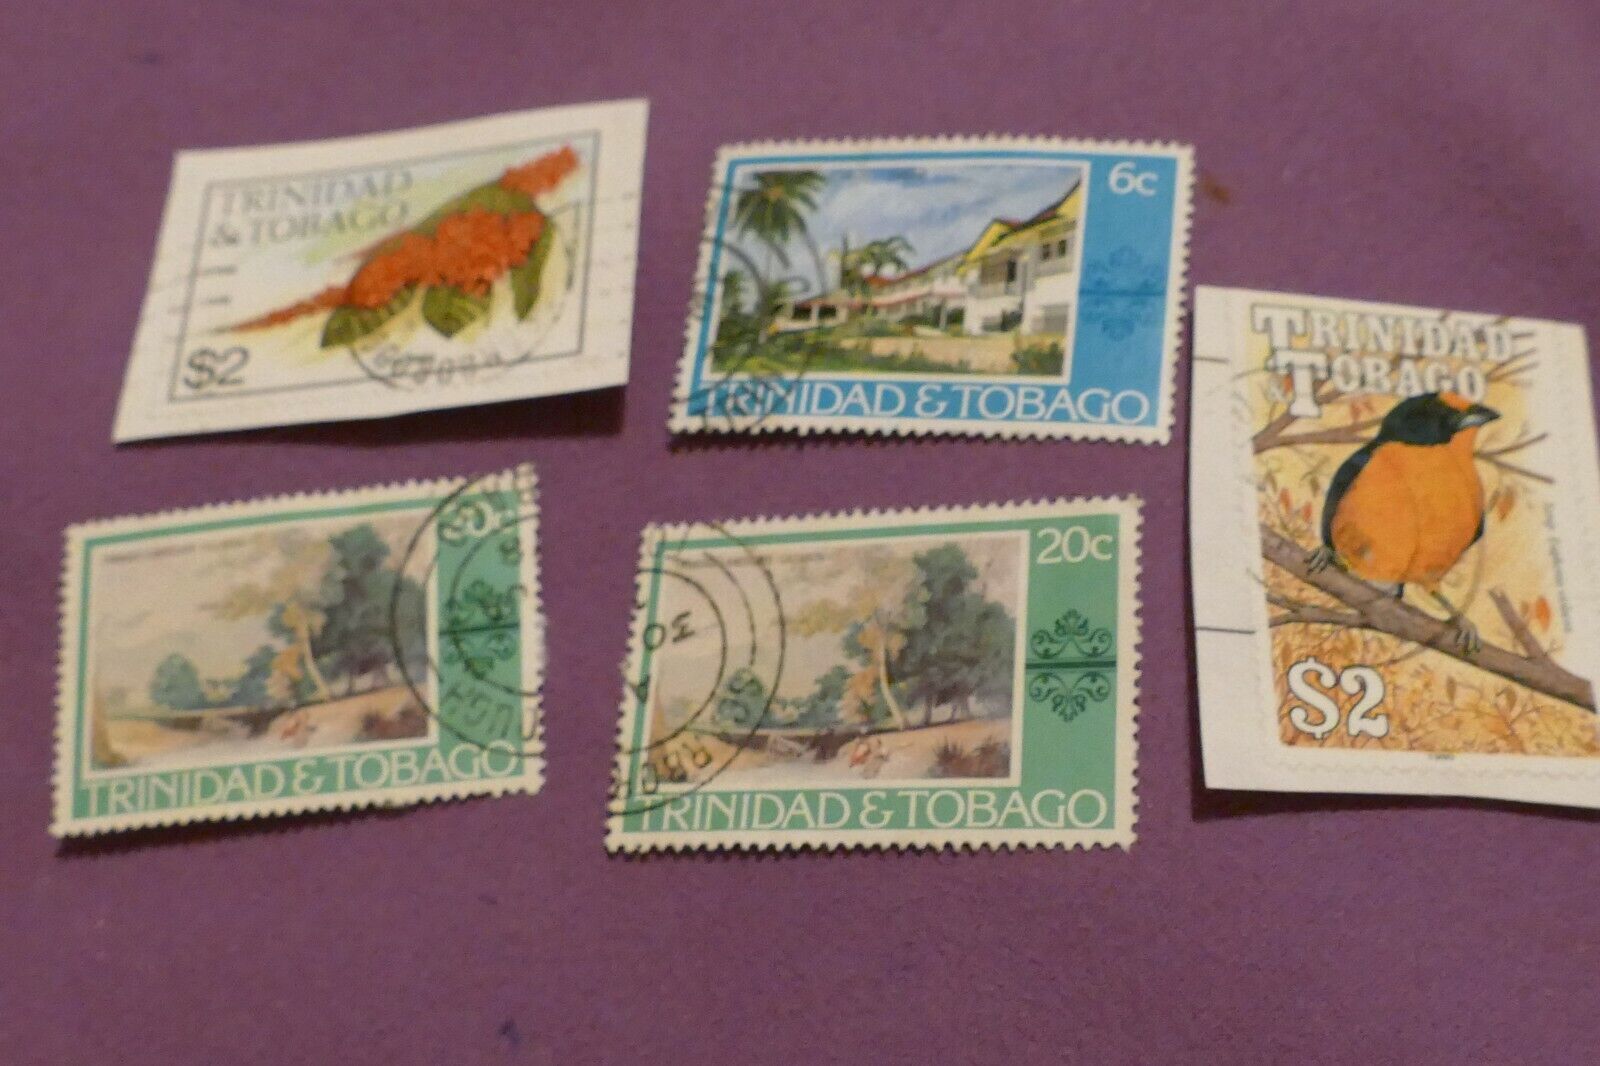 5 Trinidad used postage stamps - postal Branded goods collectors Baltimore Mall philately